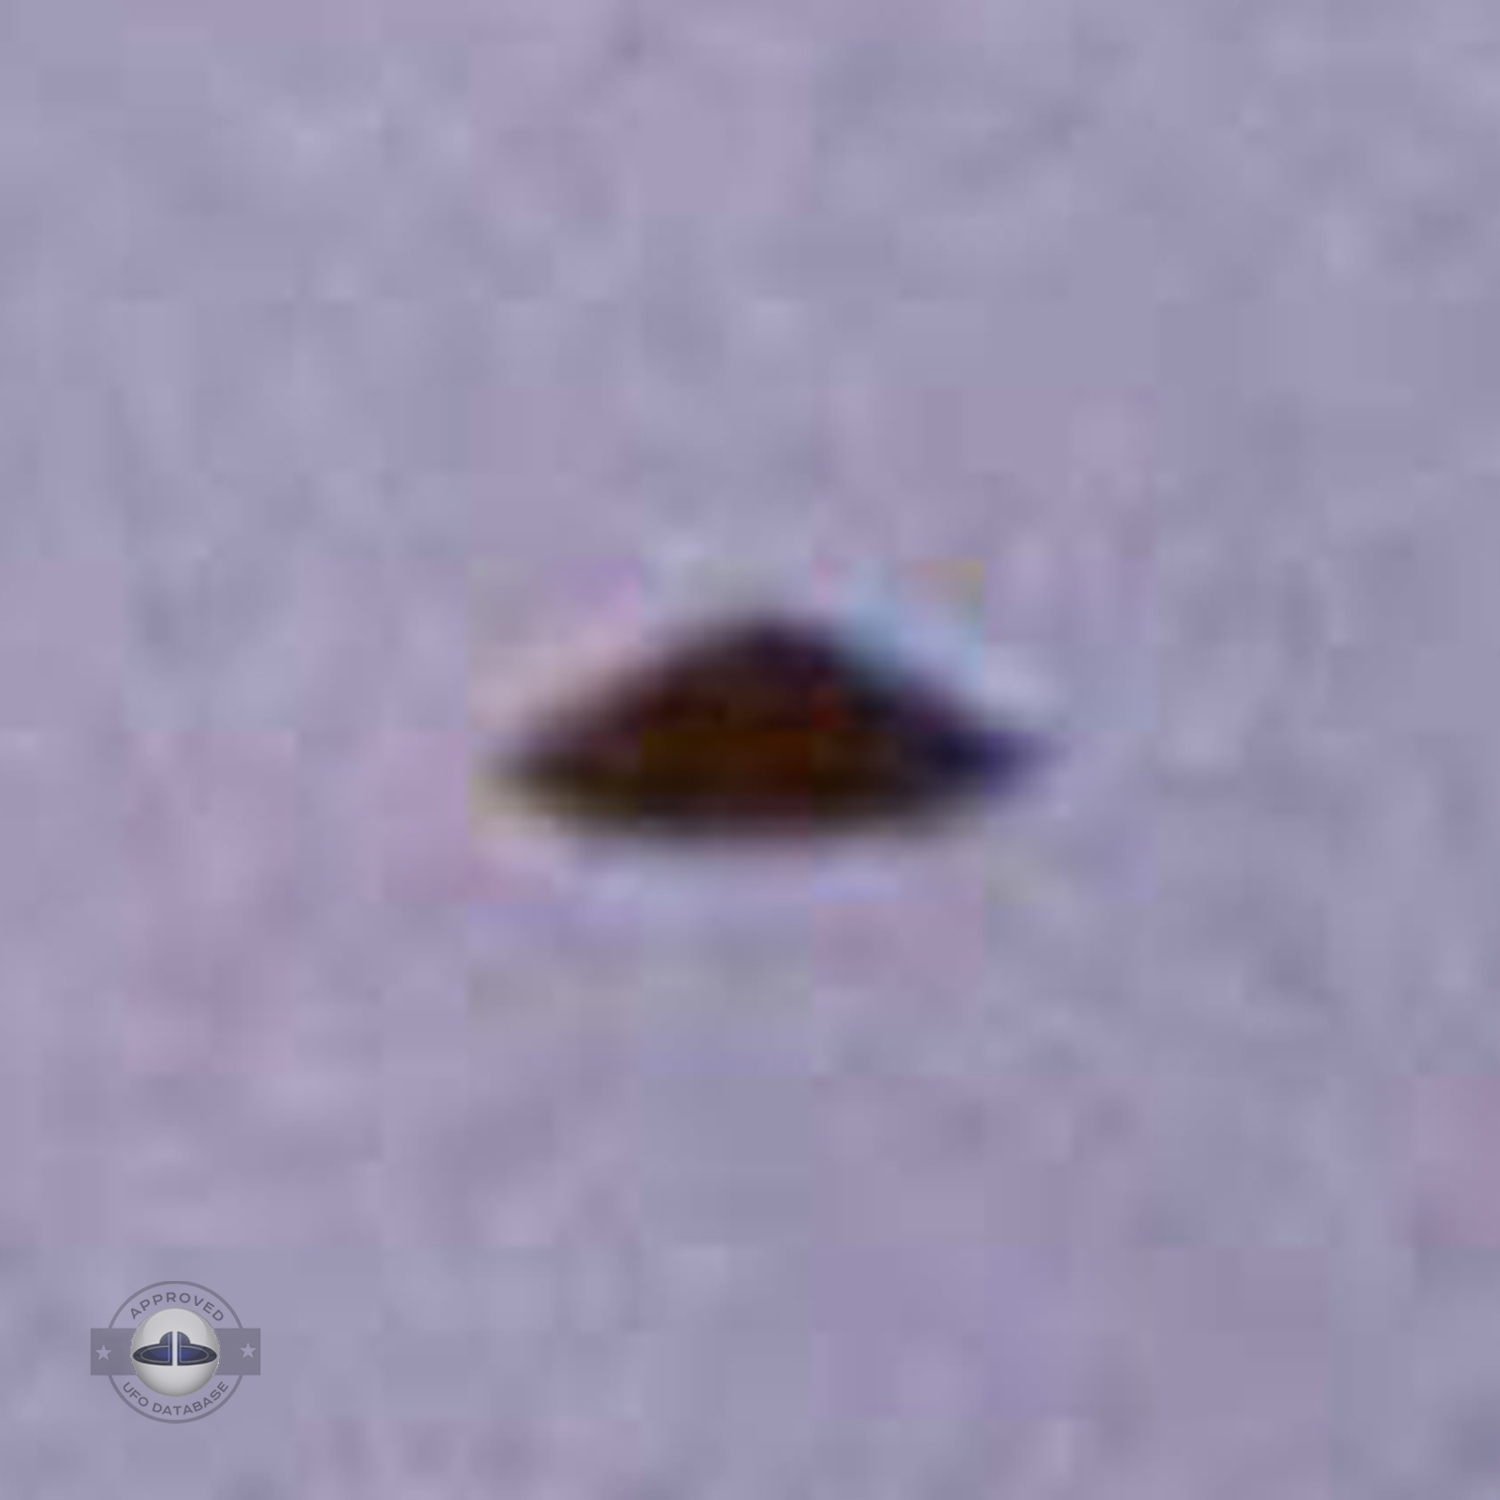 UFO seen over a roof of a house in Puerto Madryn in Argentina 1975 UFO Picture #28-4